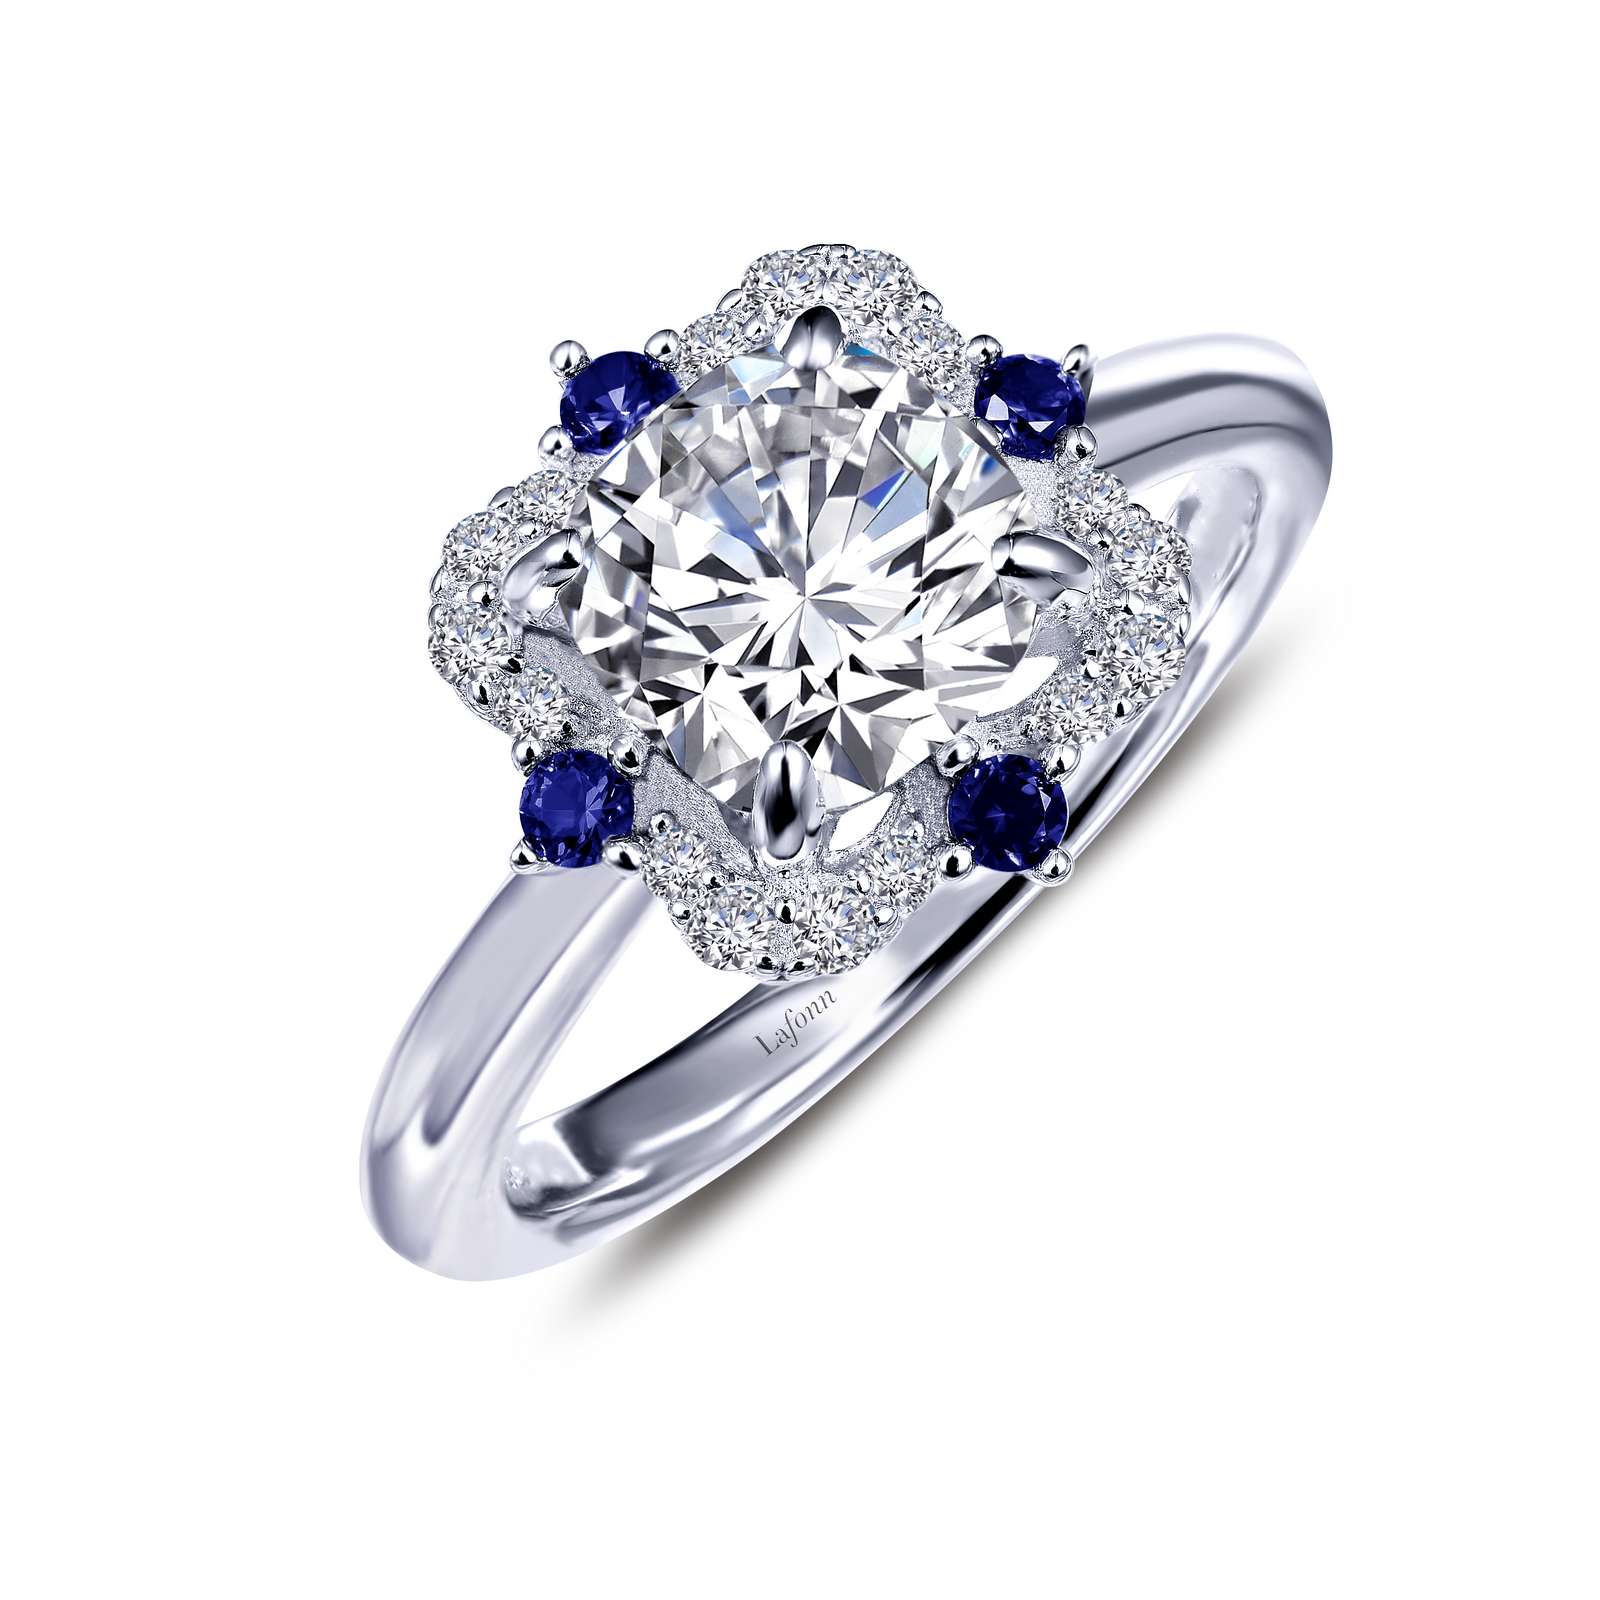 Art Deco Inspired Engagement Ring Griner Jewelry Co. Moultrie, GA